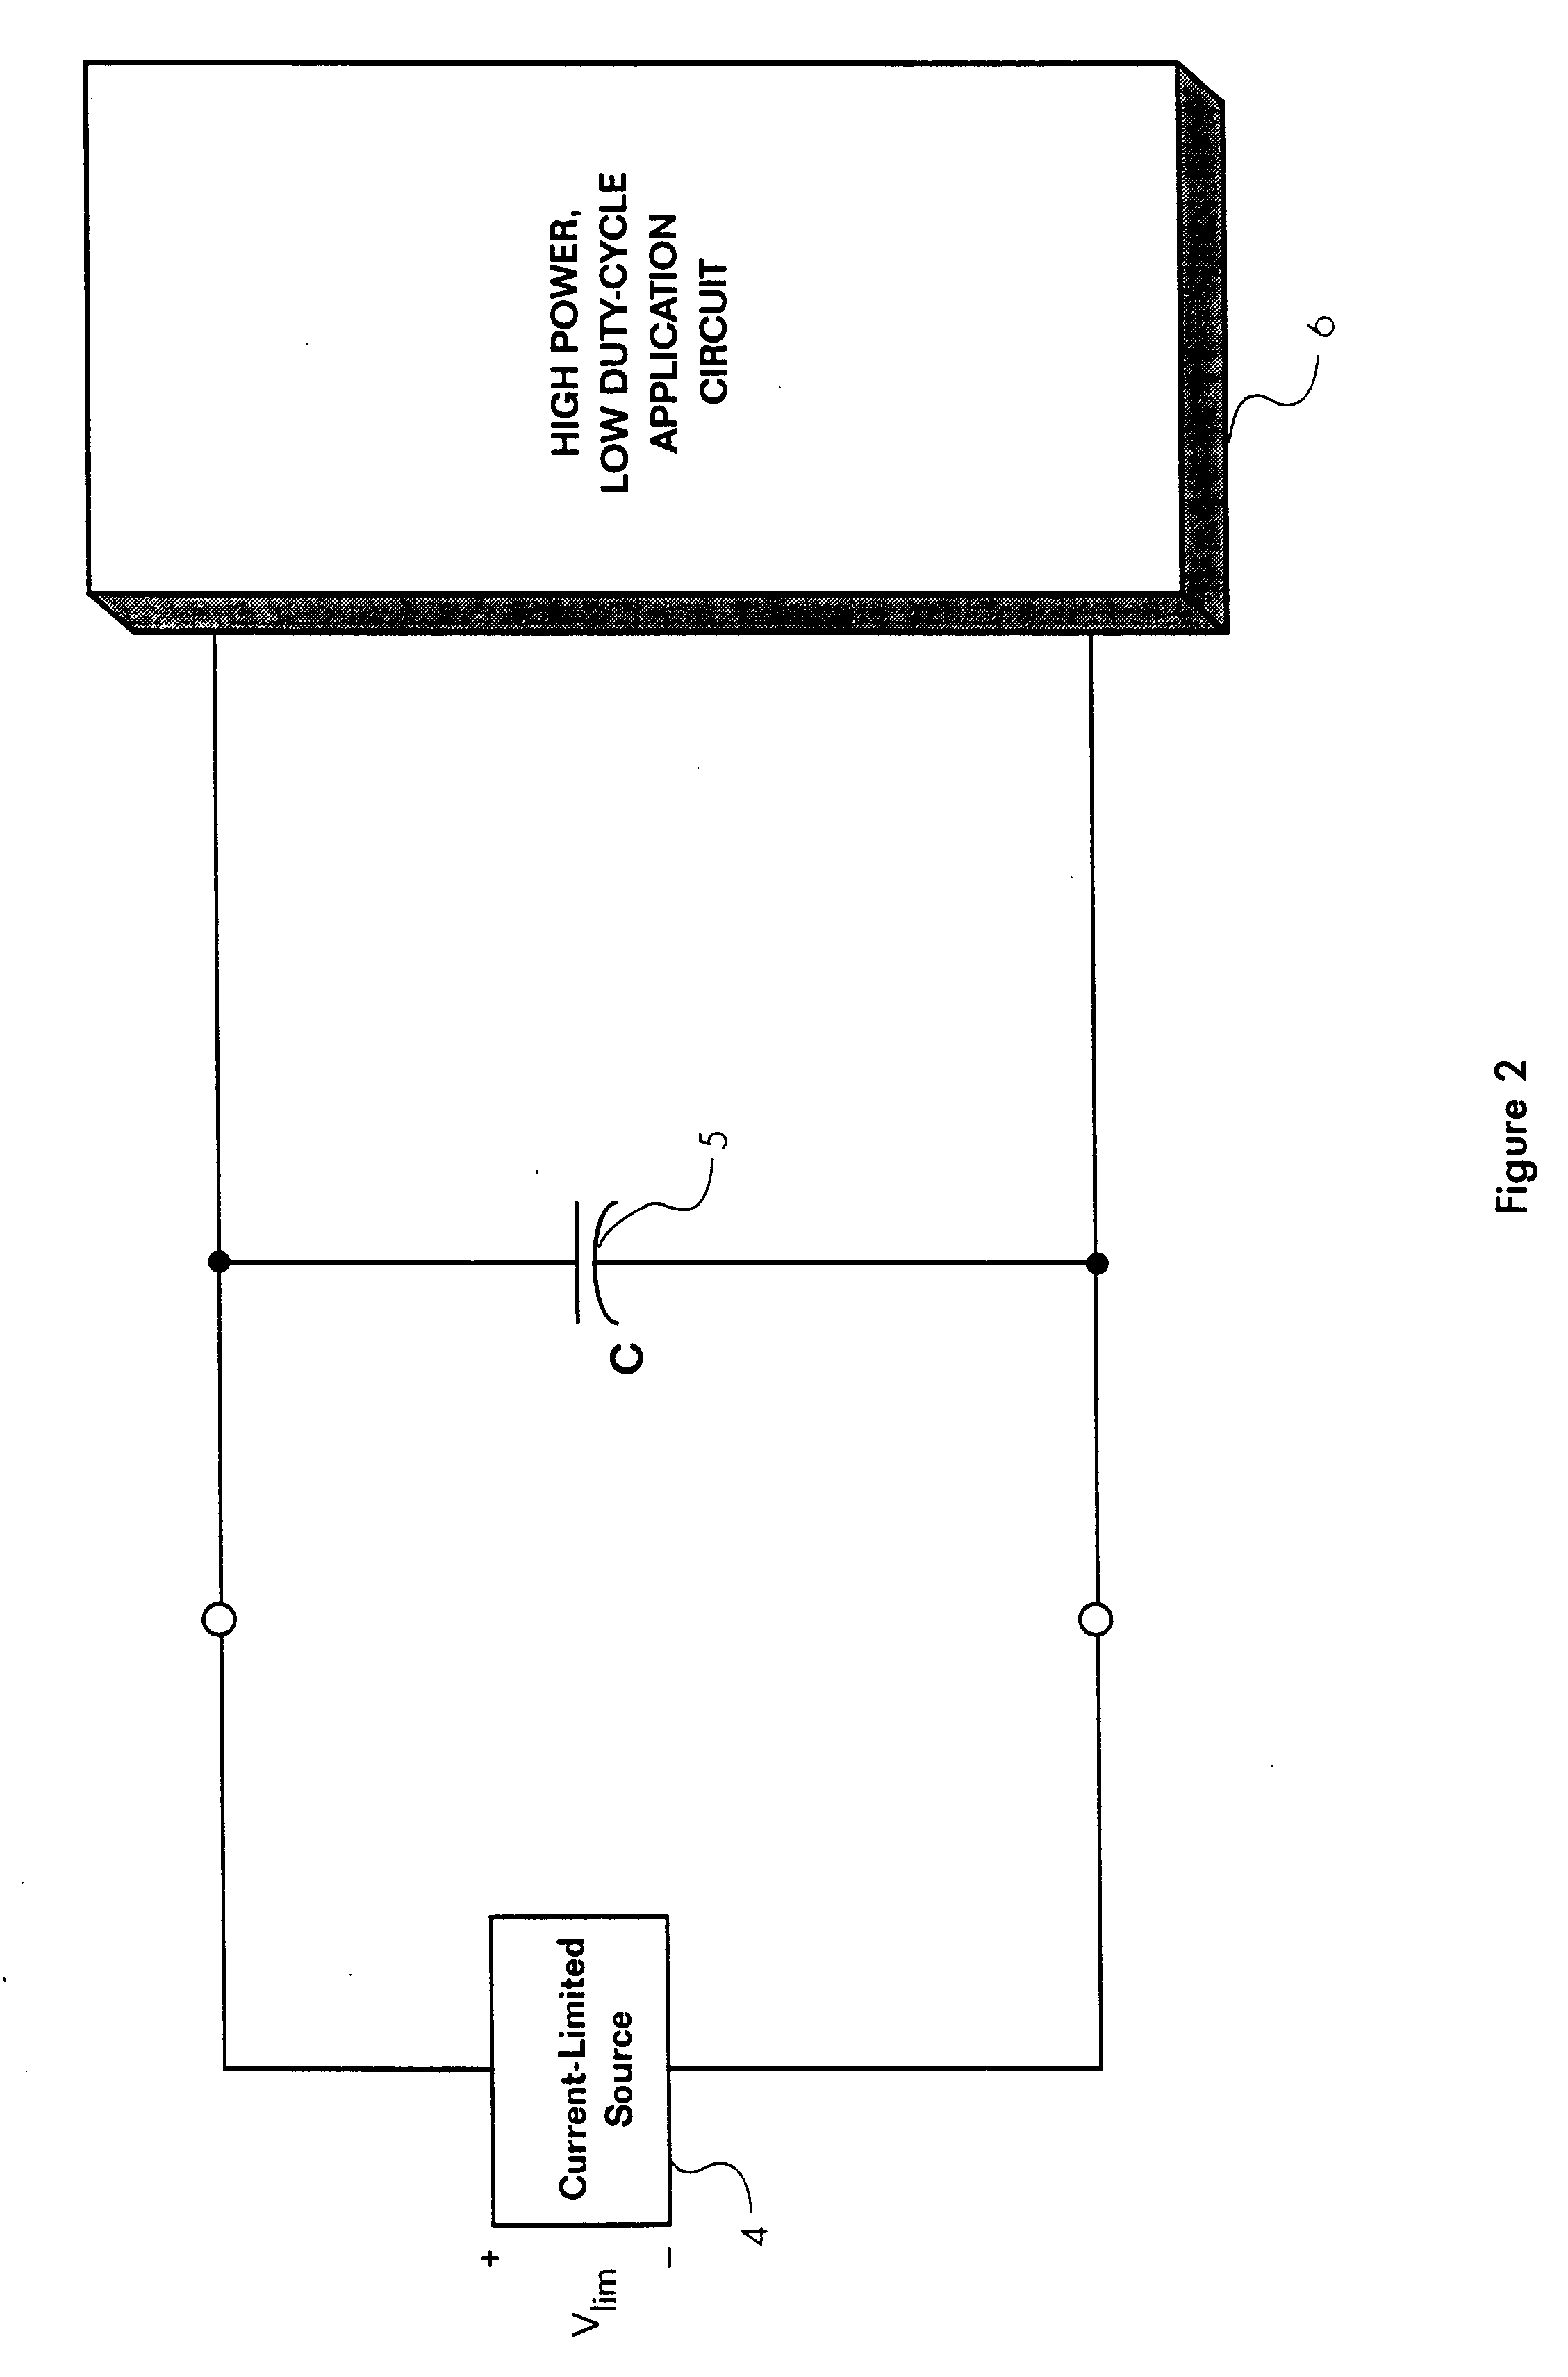 Power supply system for a packet-switched radio transmitter